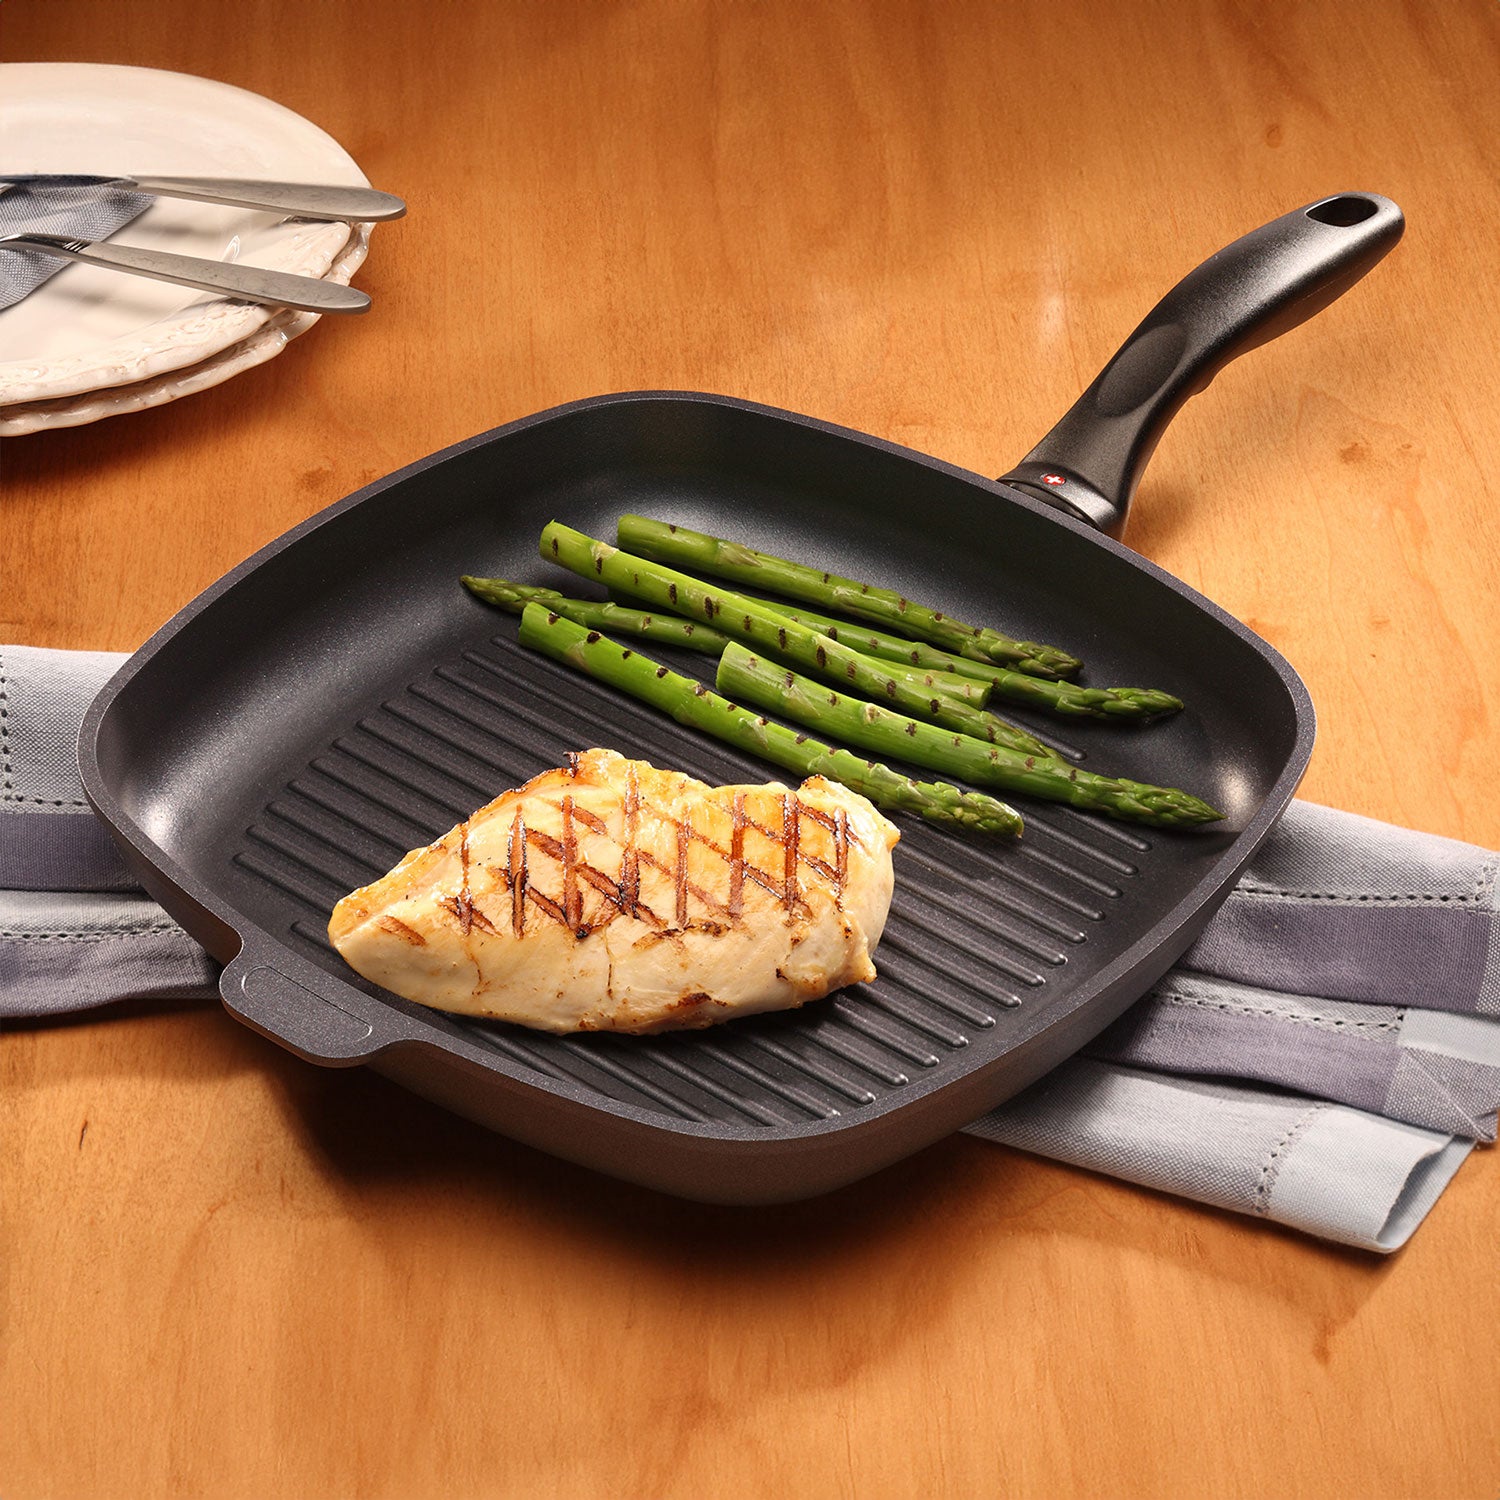 hd induction square grill pan with food on it sitting on wooden table